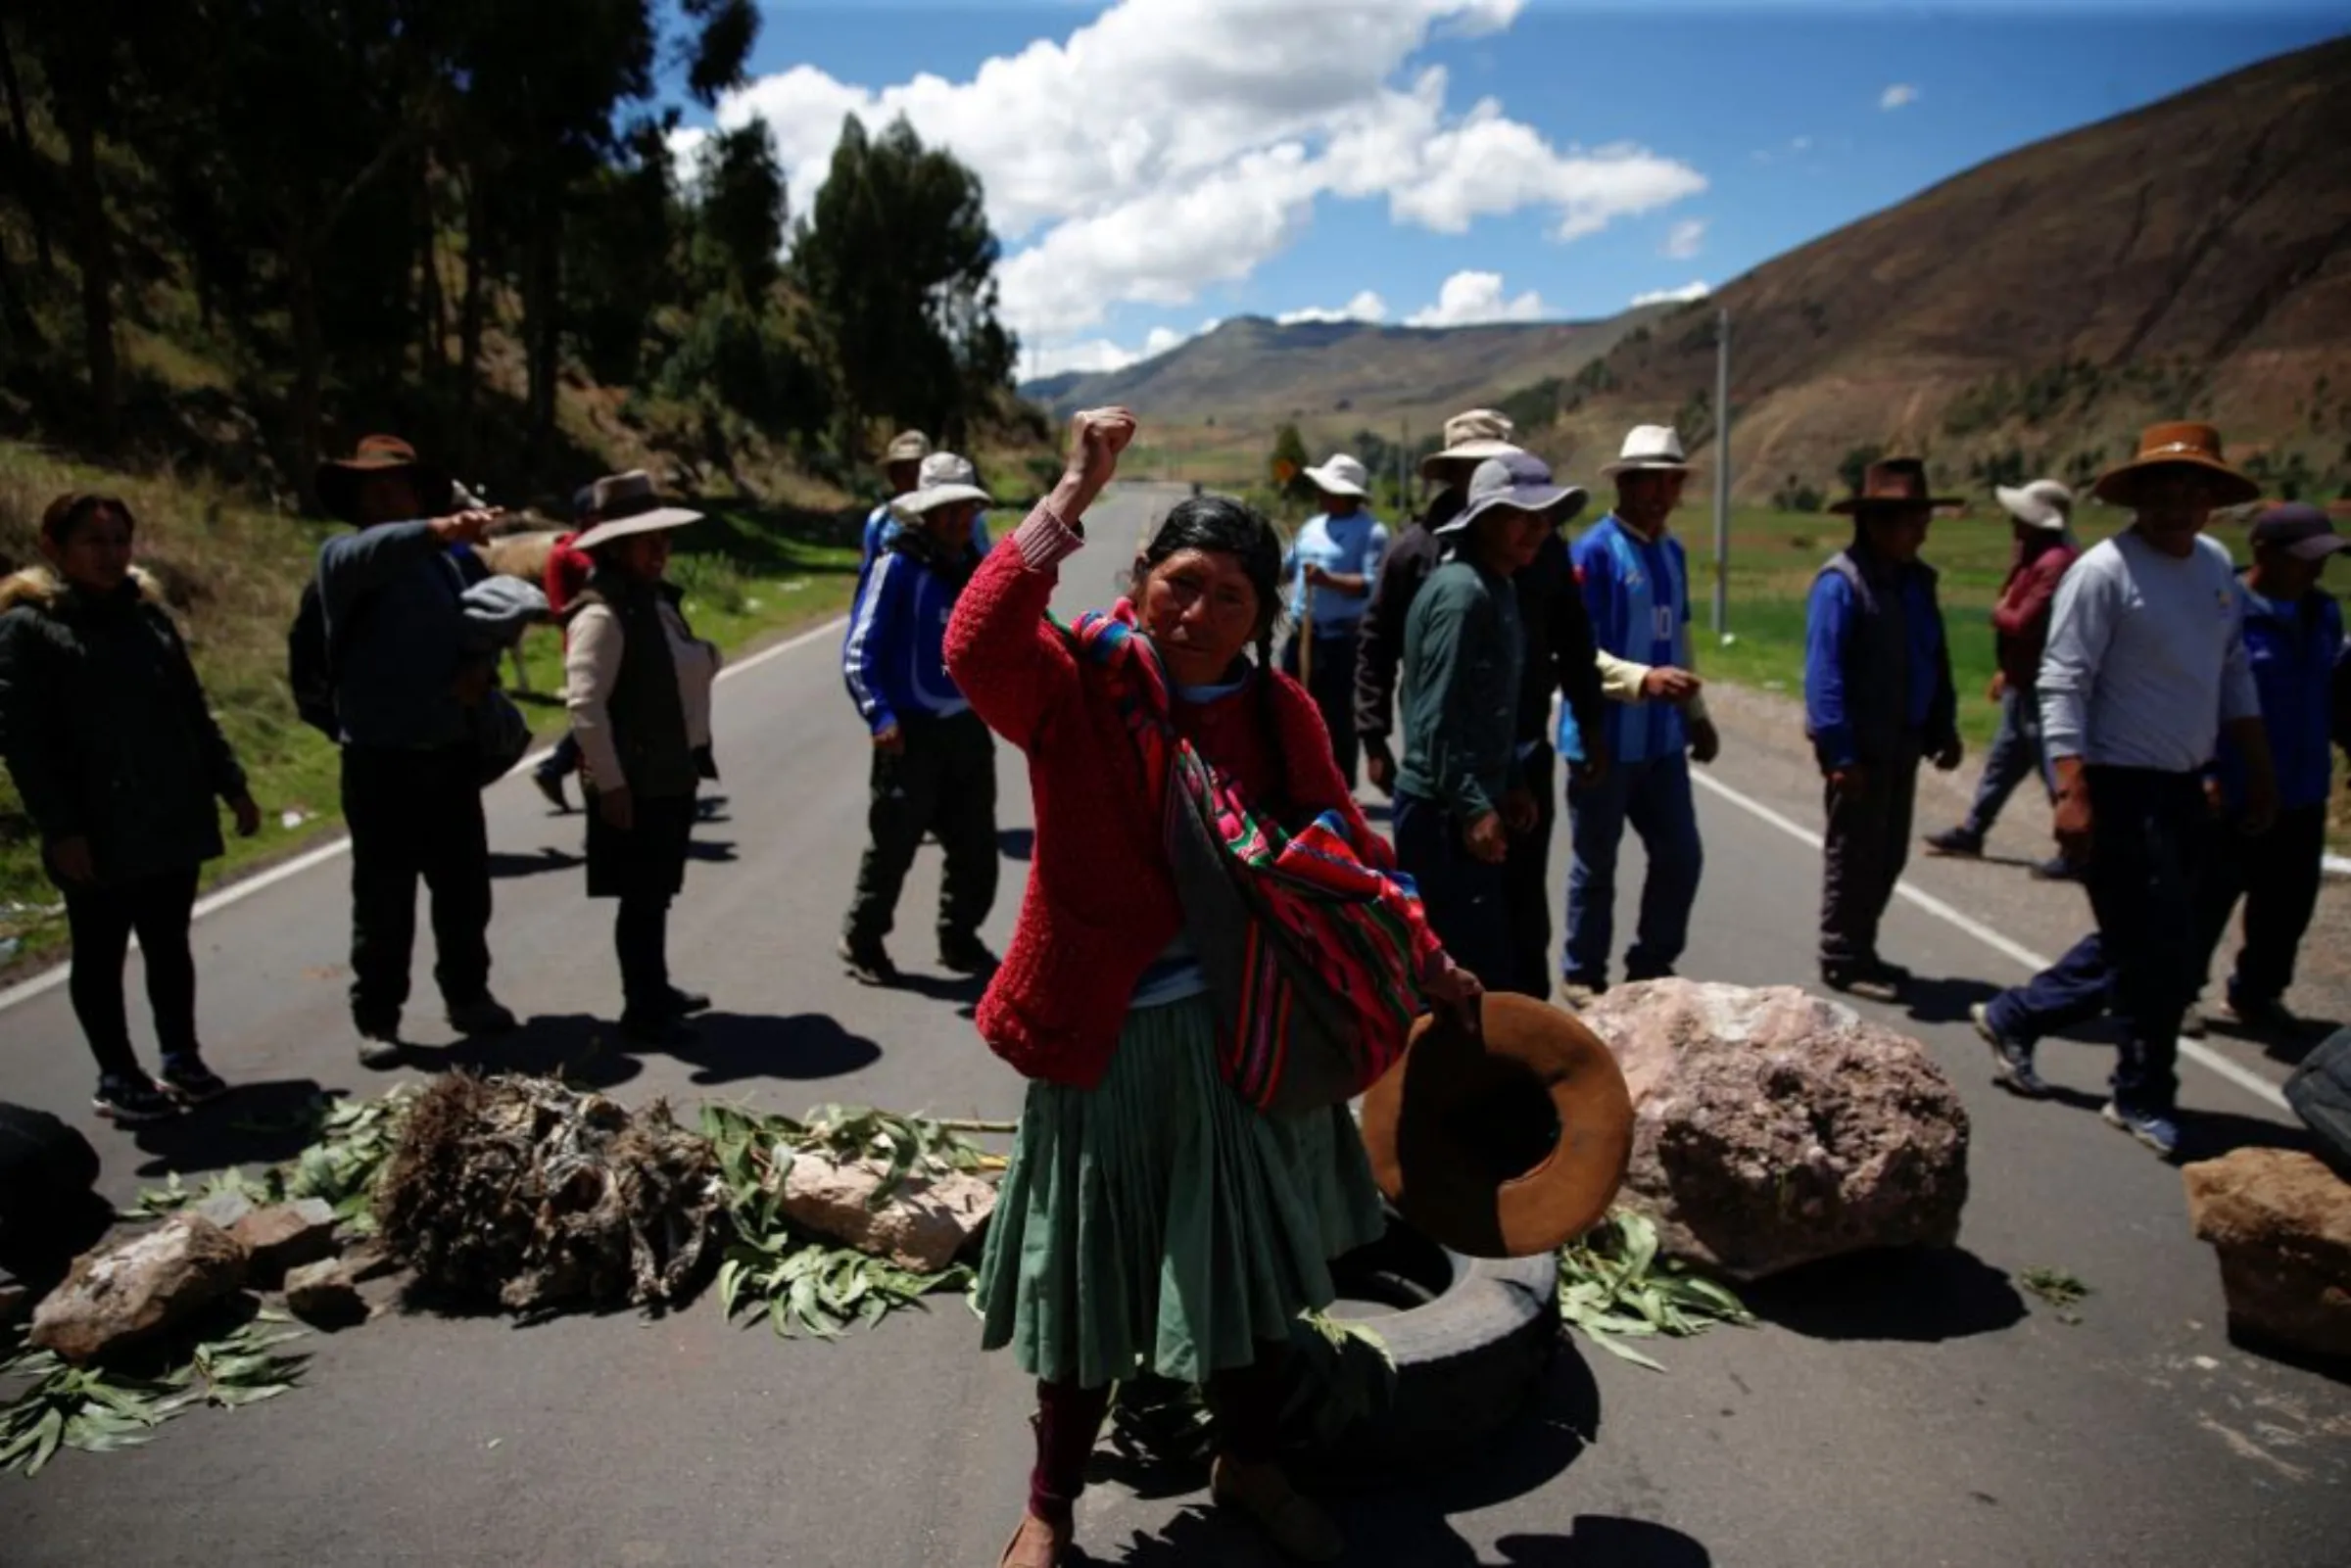 A Peruvian demonstrator gestures demanding early elections and the release of Peruvian ousted leader Pedro Castillo on a highway blockade, in Cusco, Peru January 7, 2023